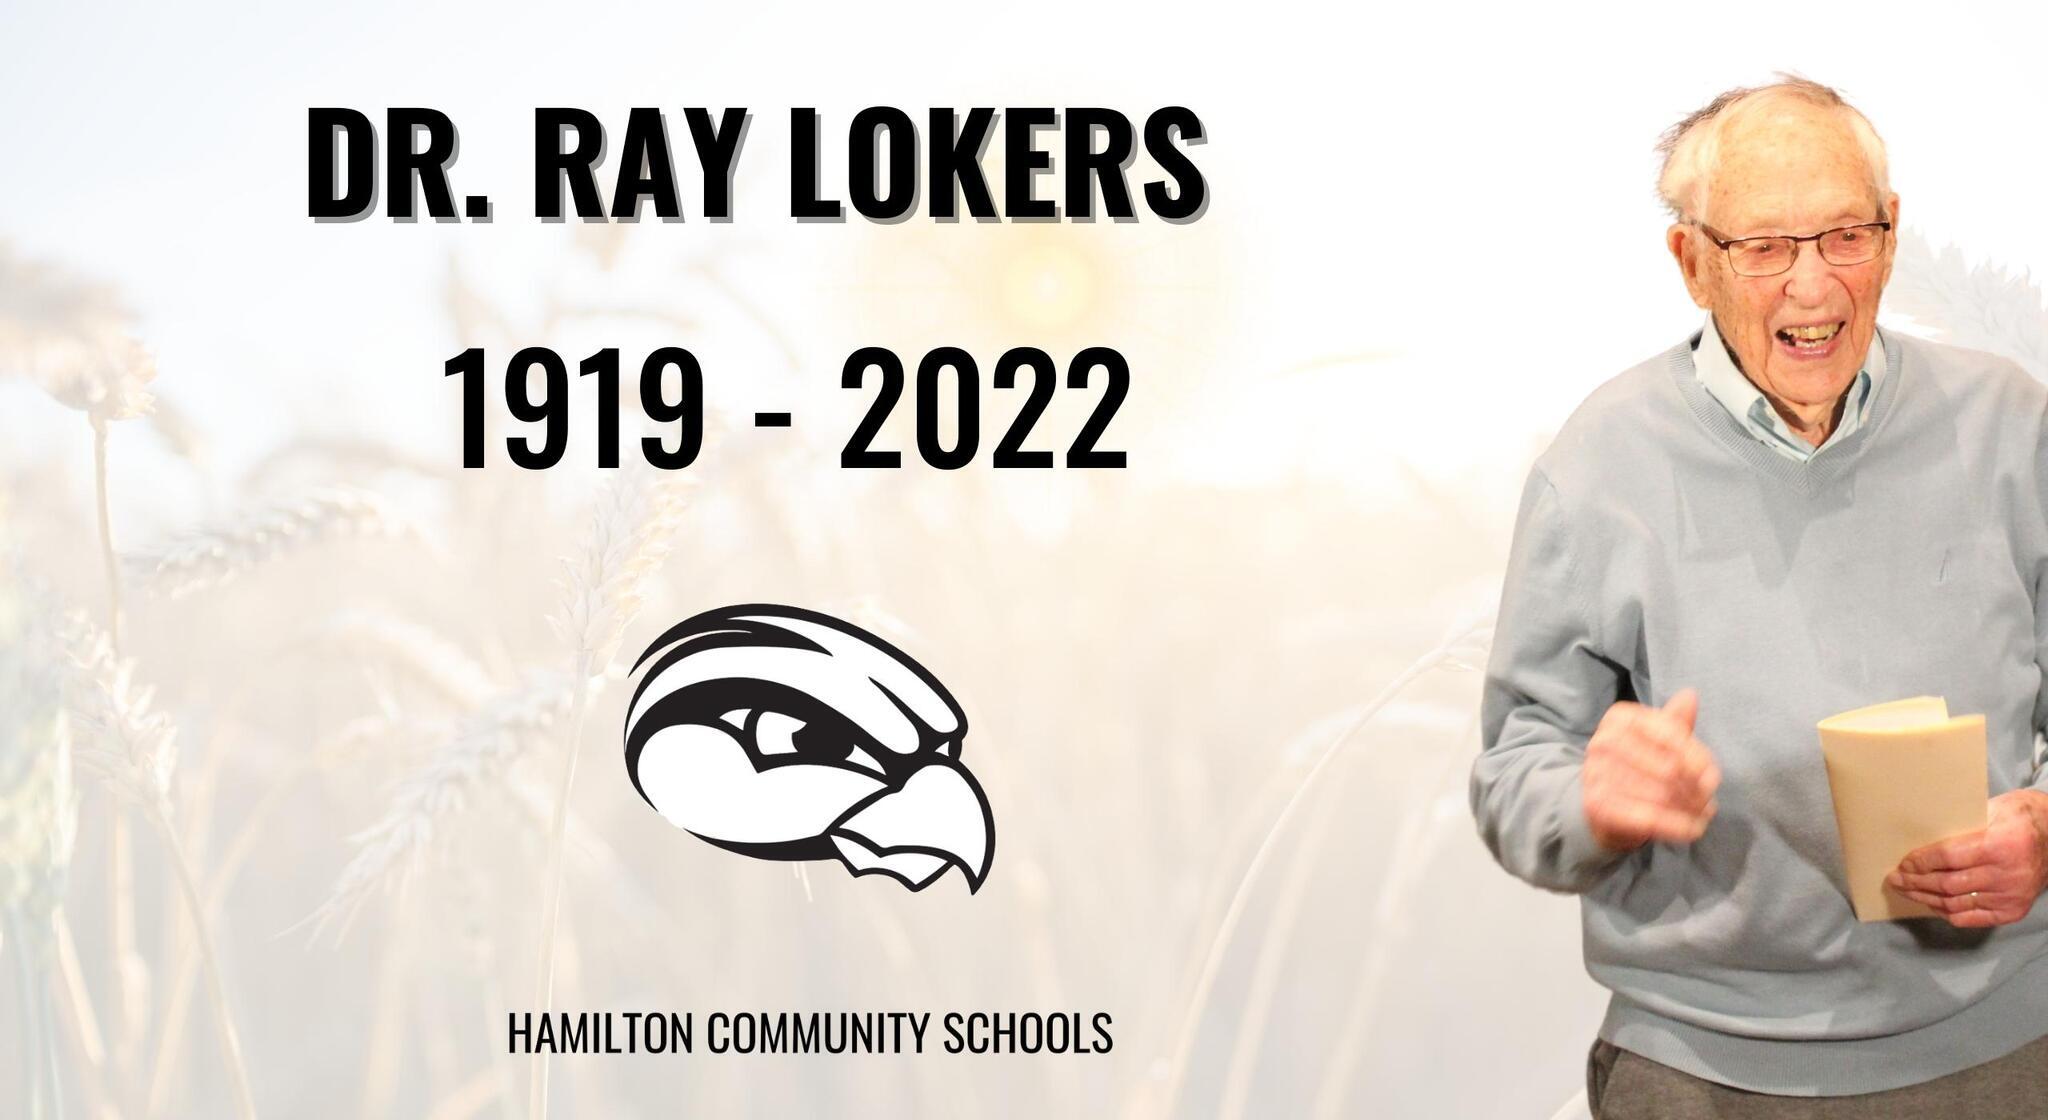 Dr. Ray Lokers